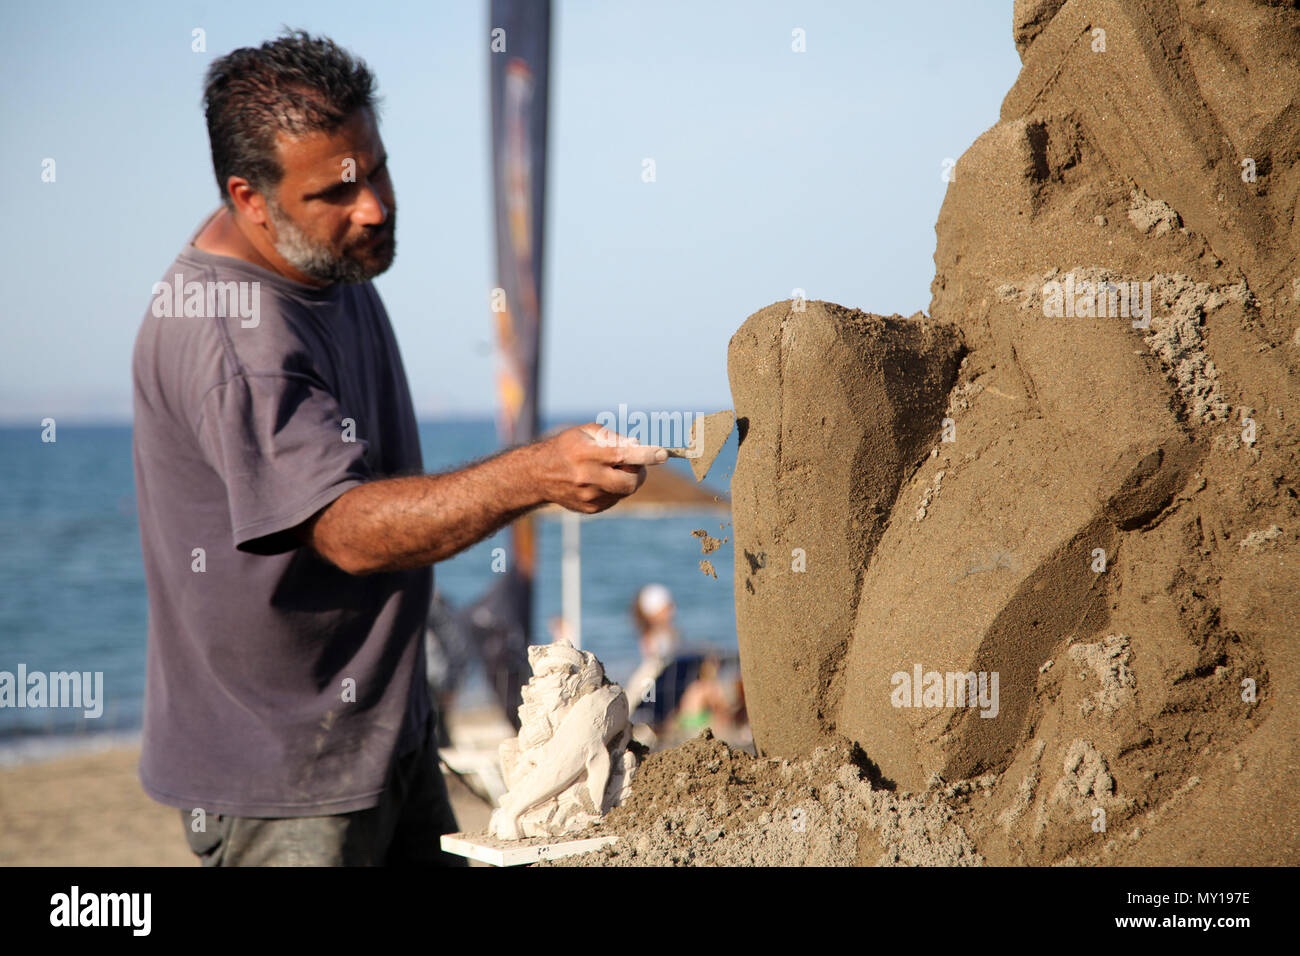 Heraklion, Greece. 5th June, 2018. Greek sculptor Andreas Arapakis works on a sculpture at Ammoudara beach, Heraklion, Greece, June 5, 2018. Ammoudara Professional Sand Sculpting Festival is held here to raise public awareness on plastic pollution. Credit: Stefanos Rapanis/Xinhua/Alamy Live News Stock Photo